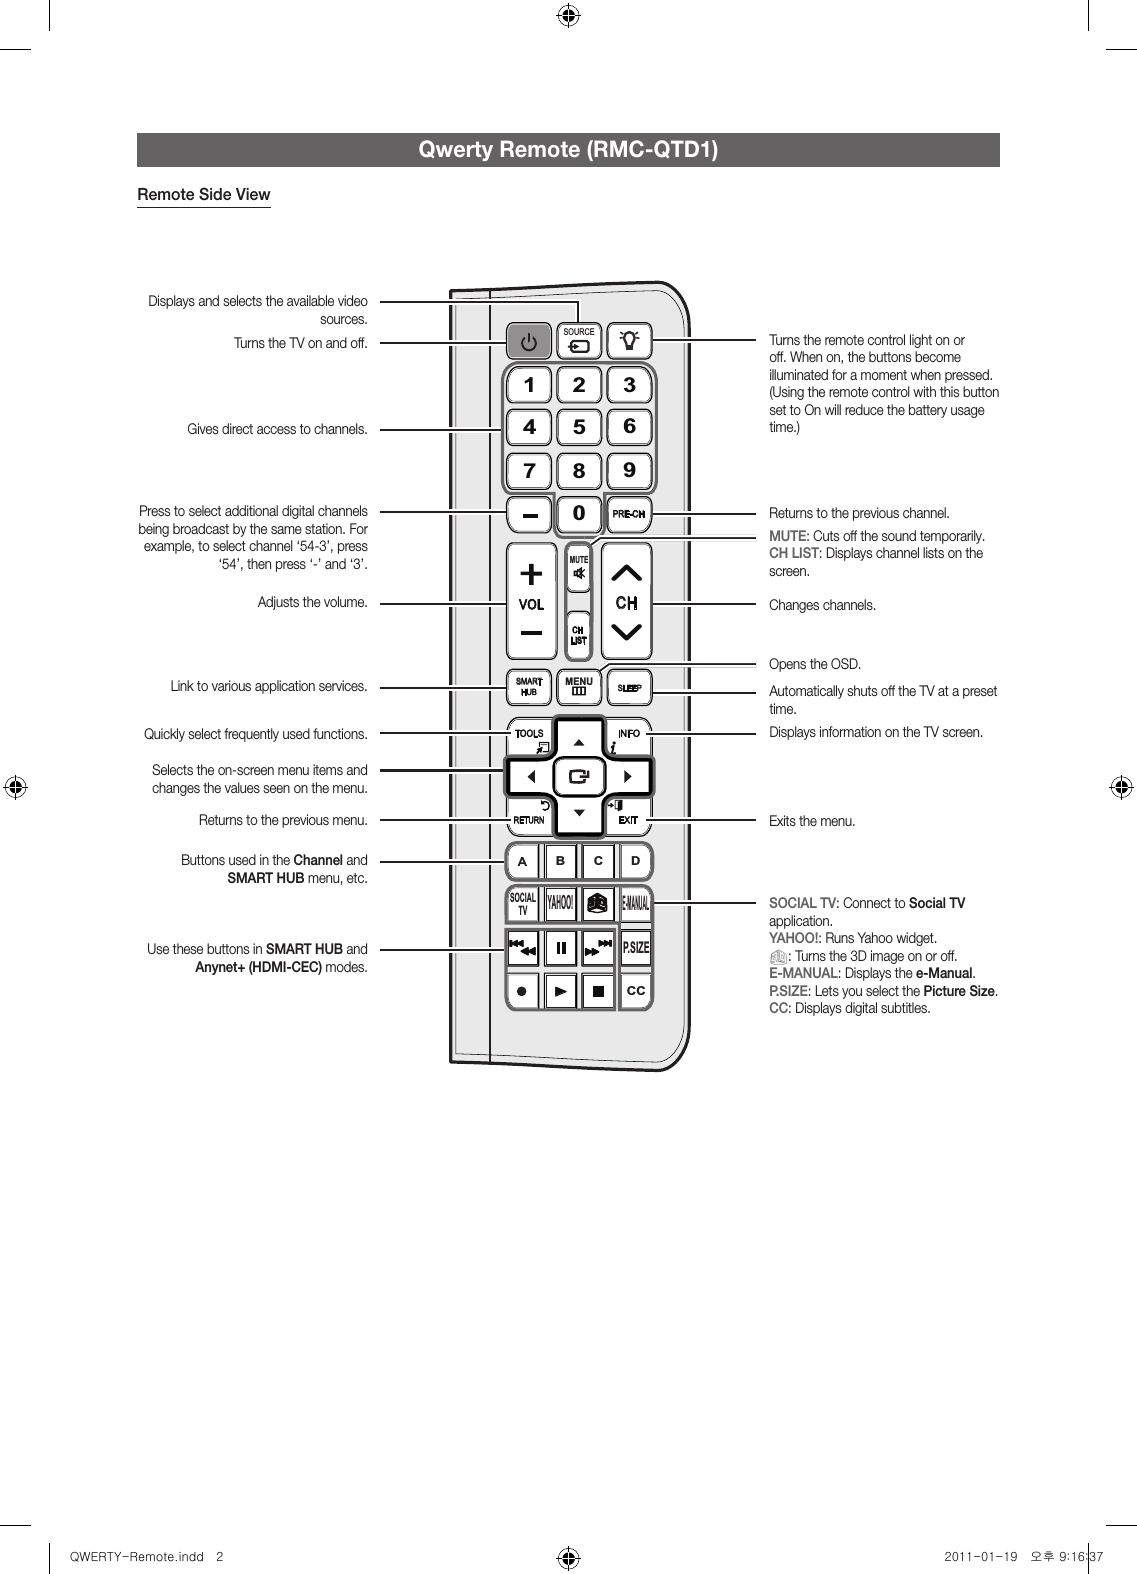 Qwerty Remote (RMC-QTD1)Remote Side ViewPRE-CH CH LIST1423567 8 90MUTEMMENUmSOURCESMARTHUBlBYAHOO!E-MANUALP.SIZECCSOCIALTVC DVOL&lt;&lt;CHSLEEPTurns the TV on and off.Displays and selects the available video sources.Turns the remote control light on or off. When on, the buttons become illuminated for a moment when pressed. (Using the remote control with this button set to On will reduce the battery usage time.)Returns to the previous channel.MUTE: Cuts off the sound temporarily.CH LIST: Displays channel lists on the screen.Changes channels.Automatically shuts off the TV at a preset time.Displays information on the TV screen.Exits the menu.Gives direct access to channels.Press to select additional digital channels being broadcast by the same station. For example, to select channel ‘54-3’, press ‘54’, then press ‘-’ and ‘3’.Adjusts the volume.Opens the OSD. Quickly select frequently used functions.Link to various application services.Returns to the previous menu.Selects the on-screen menu items and changes the values seen on the menu.Buttons used in the Channel and SMART HUB menu, etc.Use these buttons in SMART HUB and Anynet+ (HDMI-CEC) modes. SOCIAL TV: Connect to Social TV application.YAHOO!: Runs Yahoo widget.X: Turns the 3D image on or off.E-MANUAL: Displays the e-Manual.P.SIZE: Lets you select the Picture Size.CC: Displays digital subtitles.QWERTY-Remote.indd   2 2011-01-19   오후 9:16:37